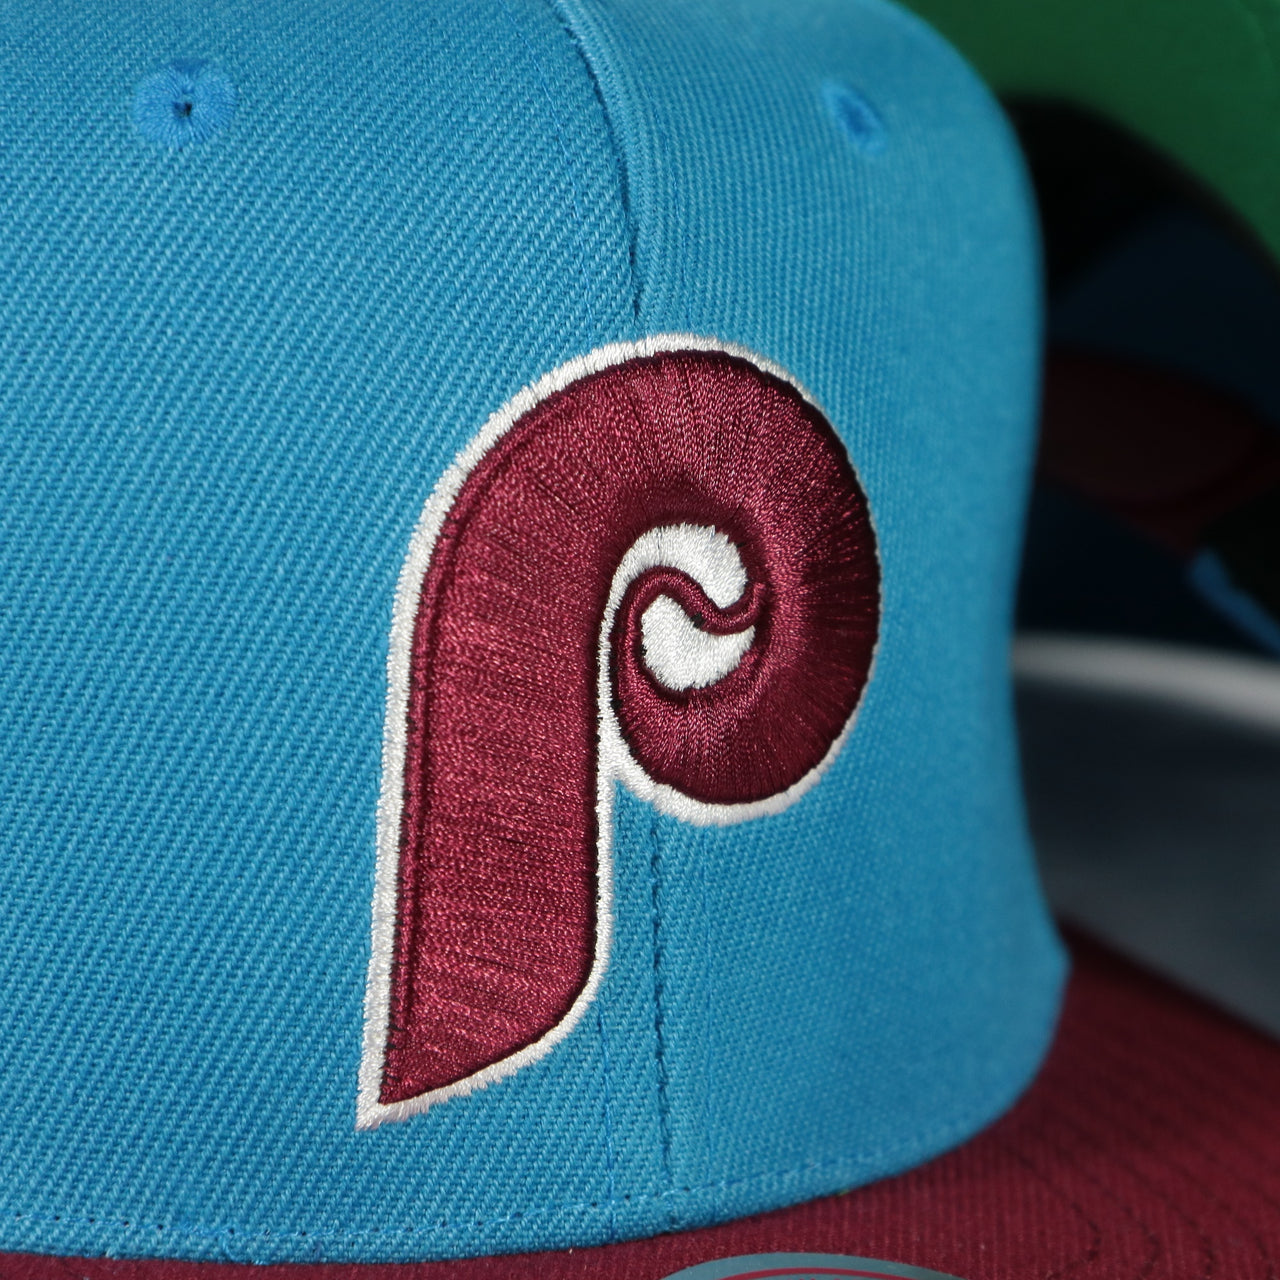 phillies logo on the Philadelphia Phillies Cooperstown "Phillies" script side patch Evergreen Pro Variety Pack | Light Blue/Maroon Snapback Hat